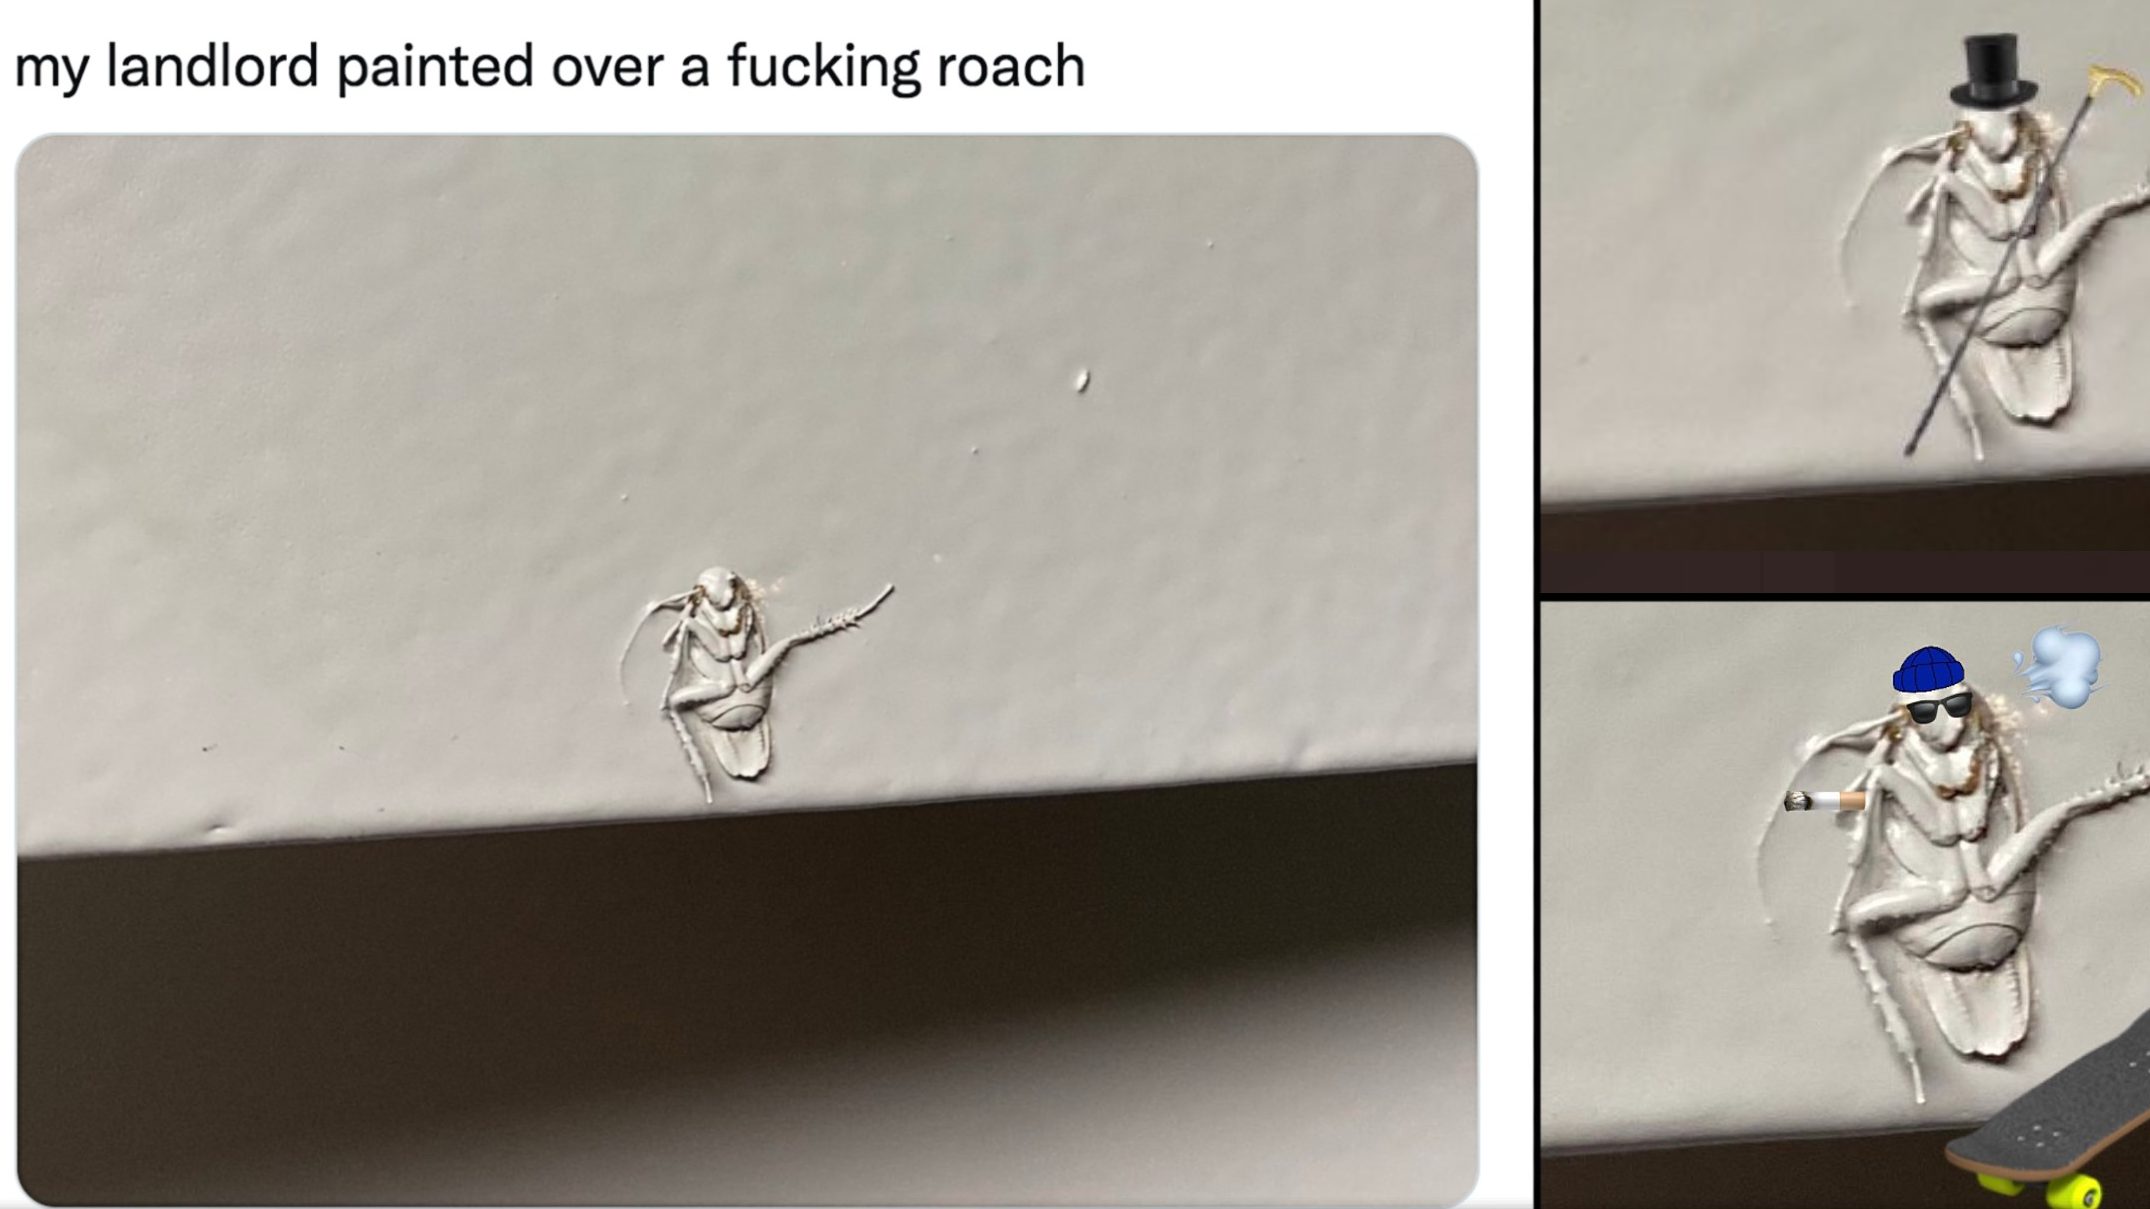 Twitter turns into photoshop battle, edits picture of roach painted to wall